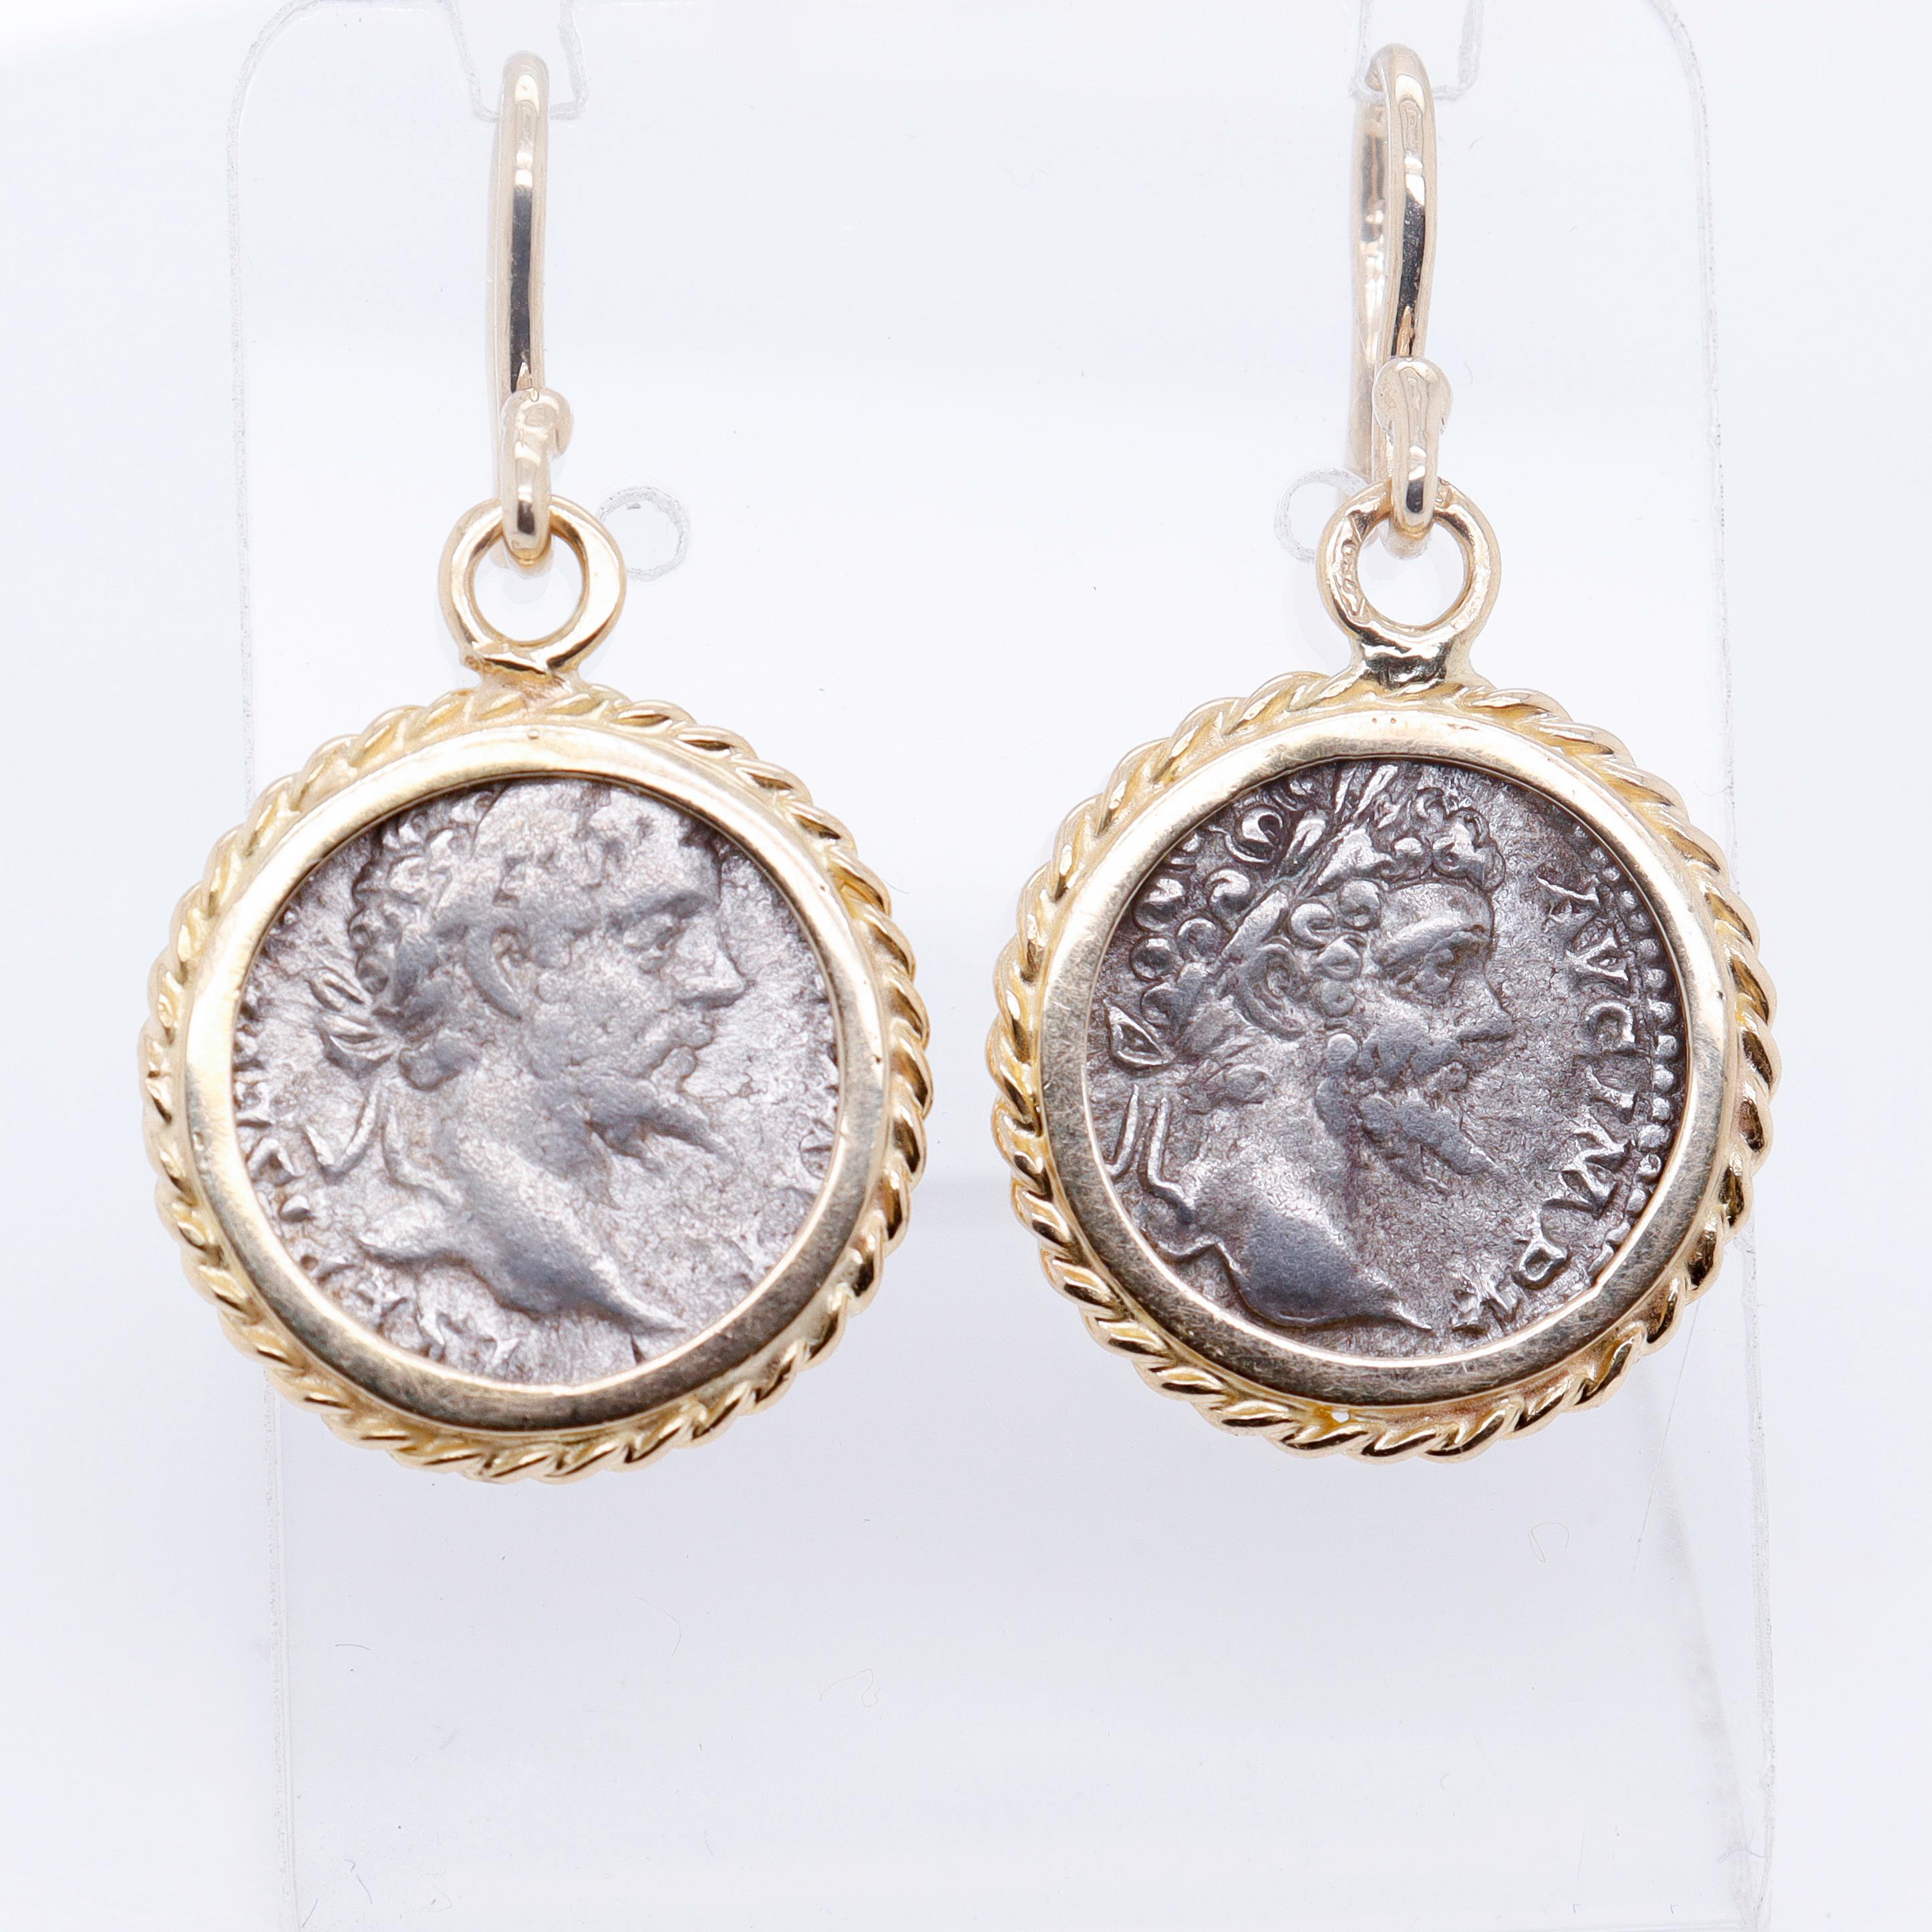 A fine pair of ancient Roman coin earrings.

Set in 18k gold.

With omega shaped ear wires and a rope-twist bezel setting for the coins.

Each coin is a silver Marcus Aurelius denarius (ca. 100-200 CE). 

With Aurelius' face to the obverse of each.